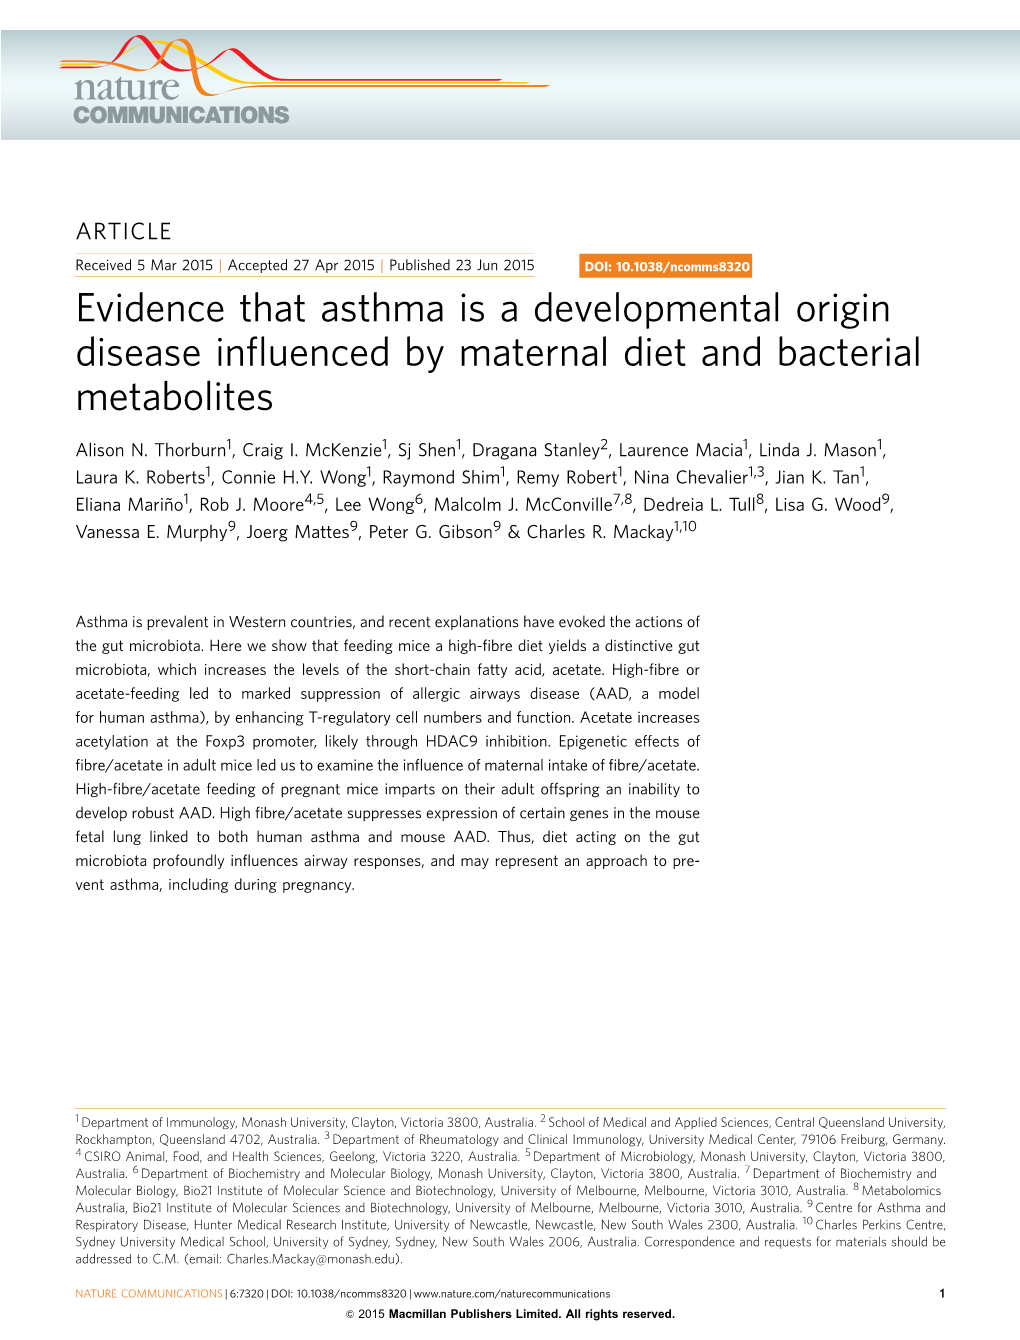 Evidence That Asthma Is a Developmental Origin Disease Inﬂuenced by Maternal Diet and Bacterial Metabolites